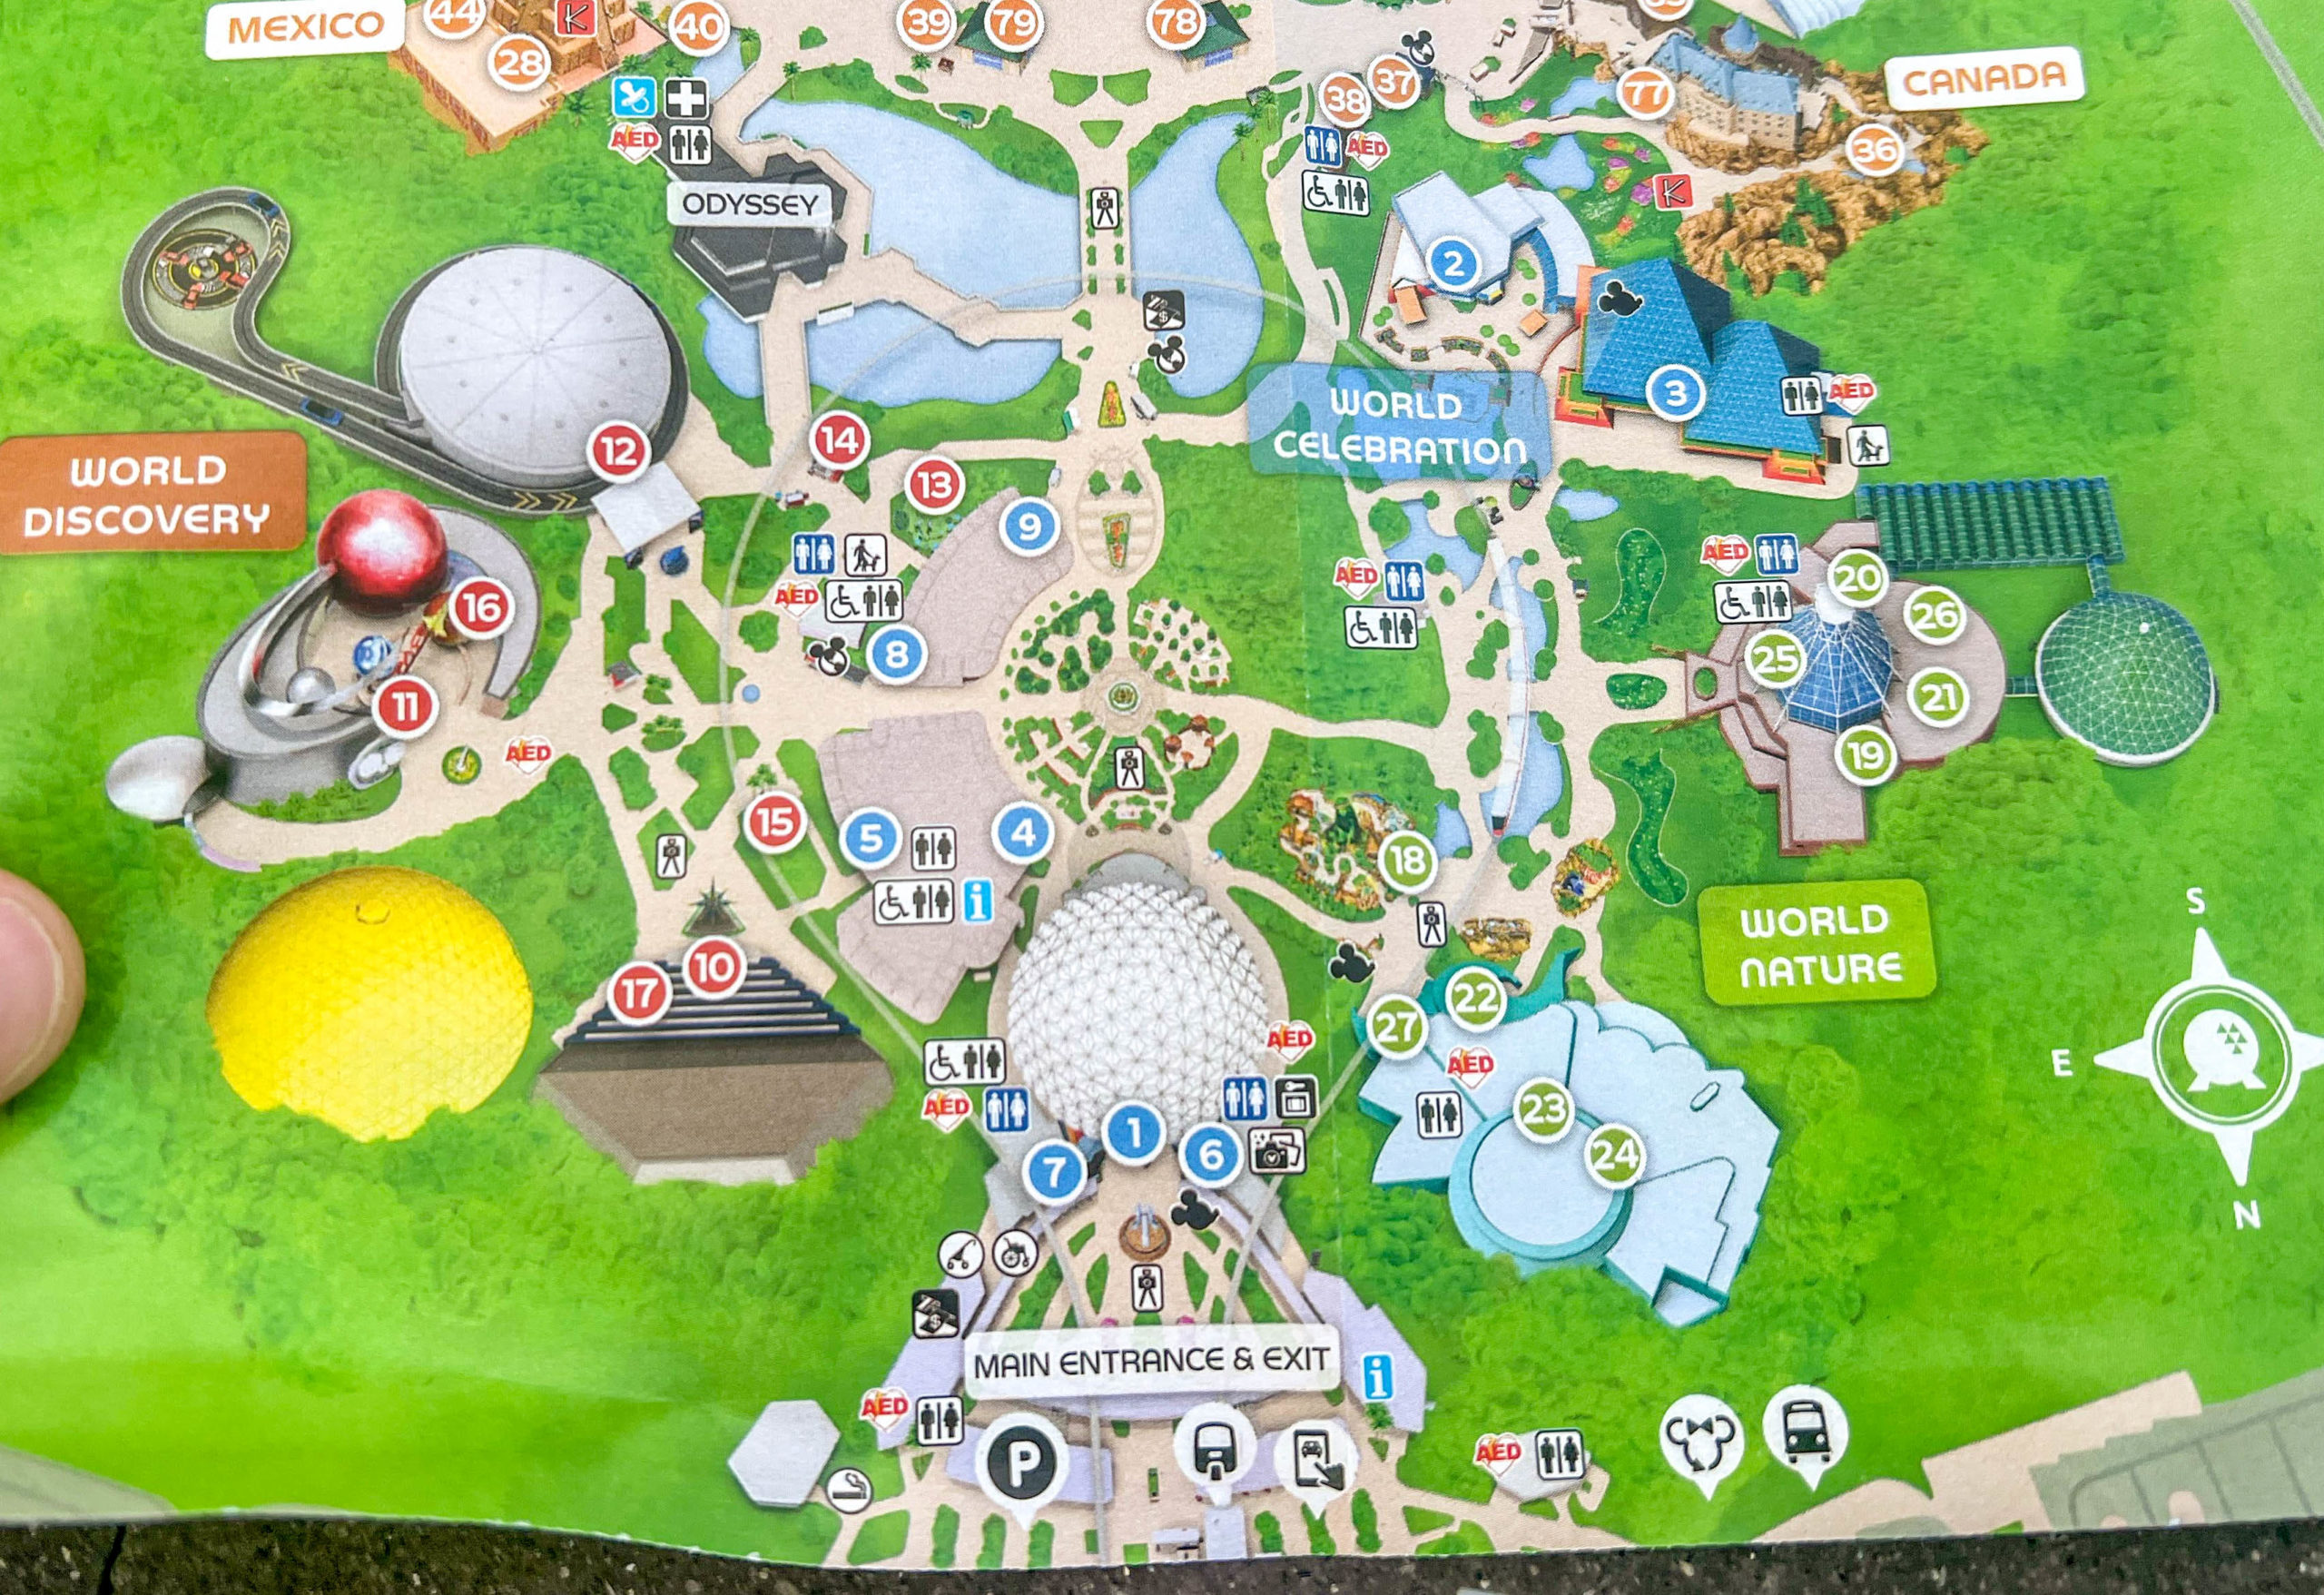 New EPCOT map